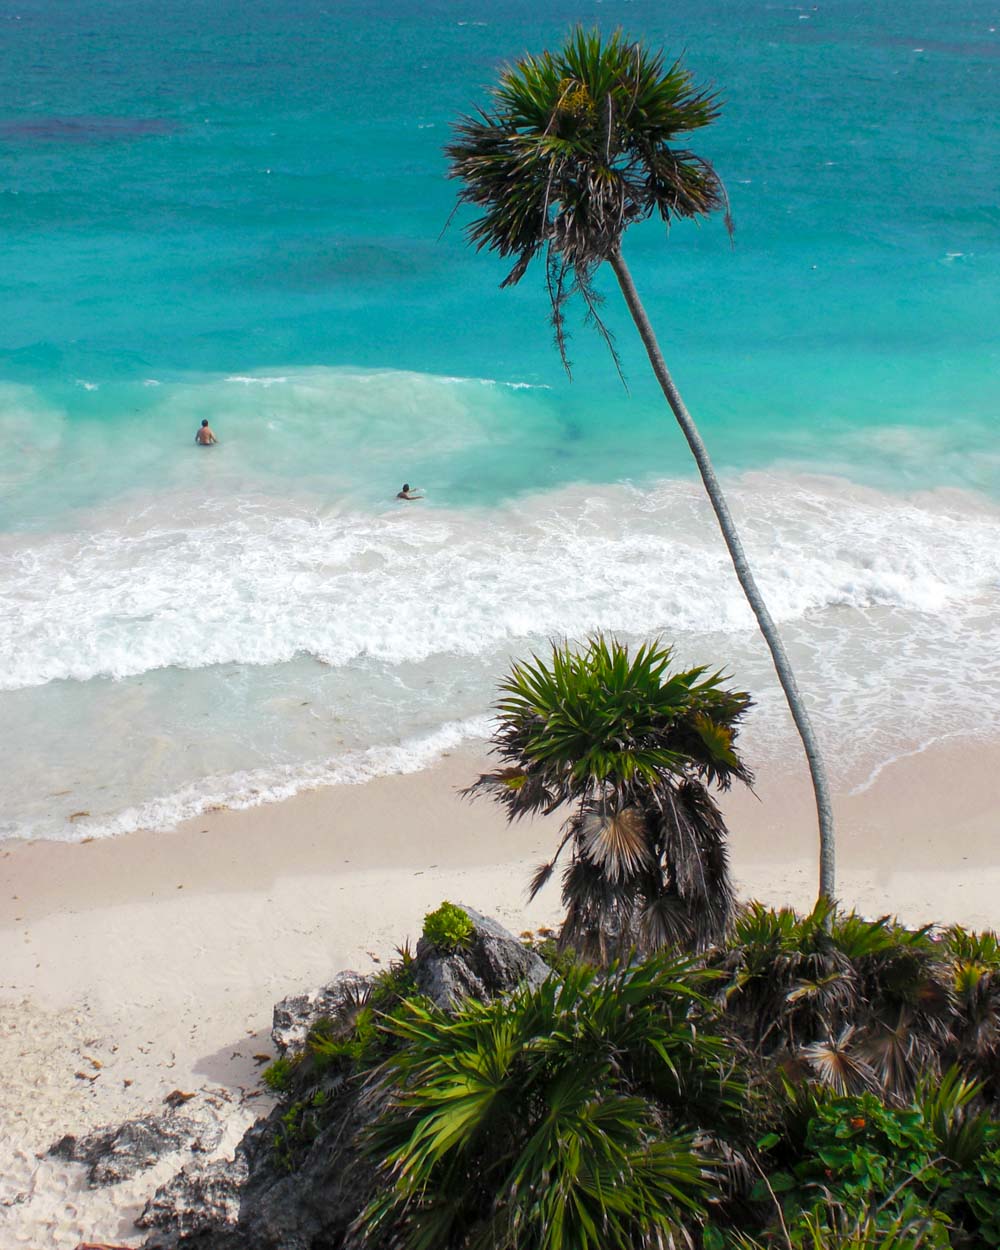 What To Do In Tulum? - Must-See Things When Visiting Tulum, Mexico